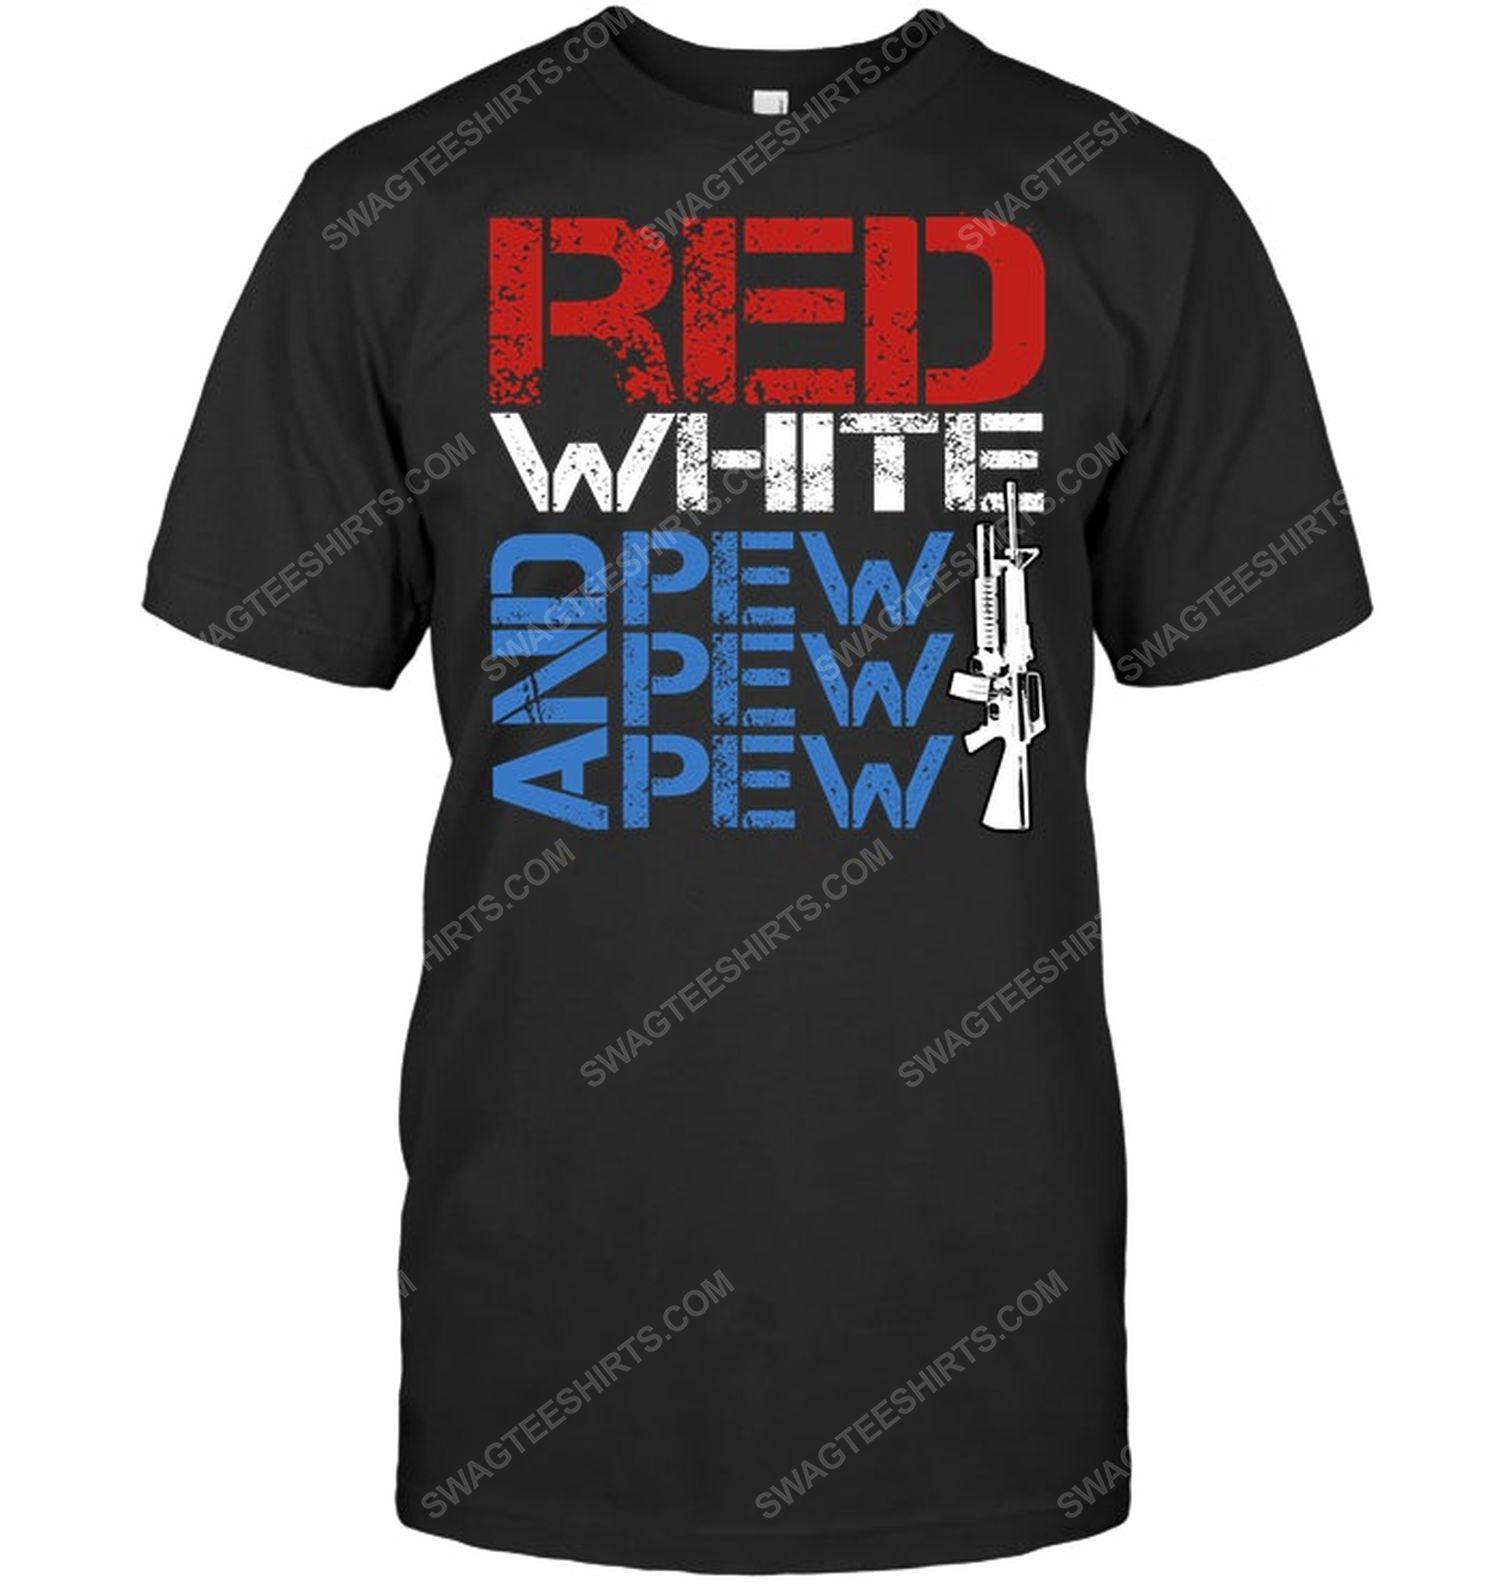 Red white and pew pew pew gun political tshirt